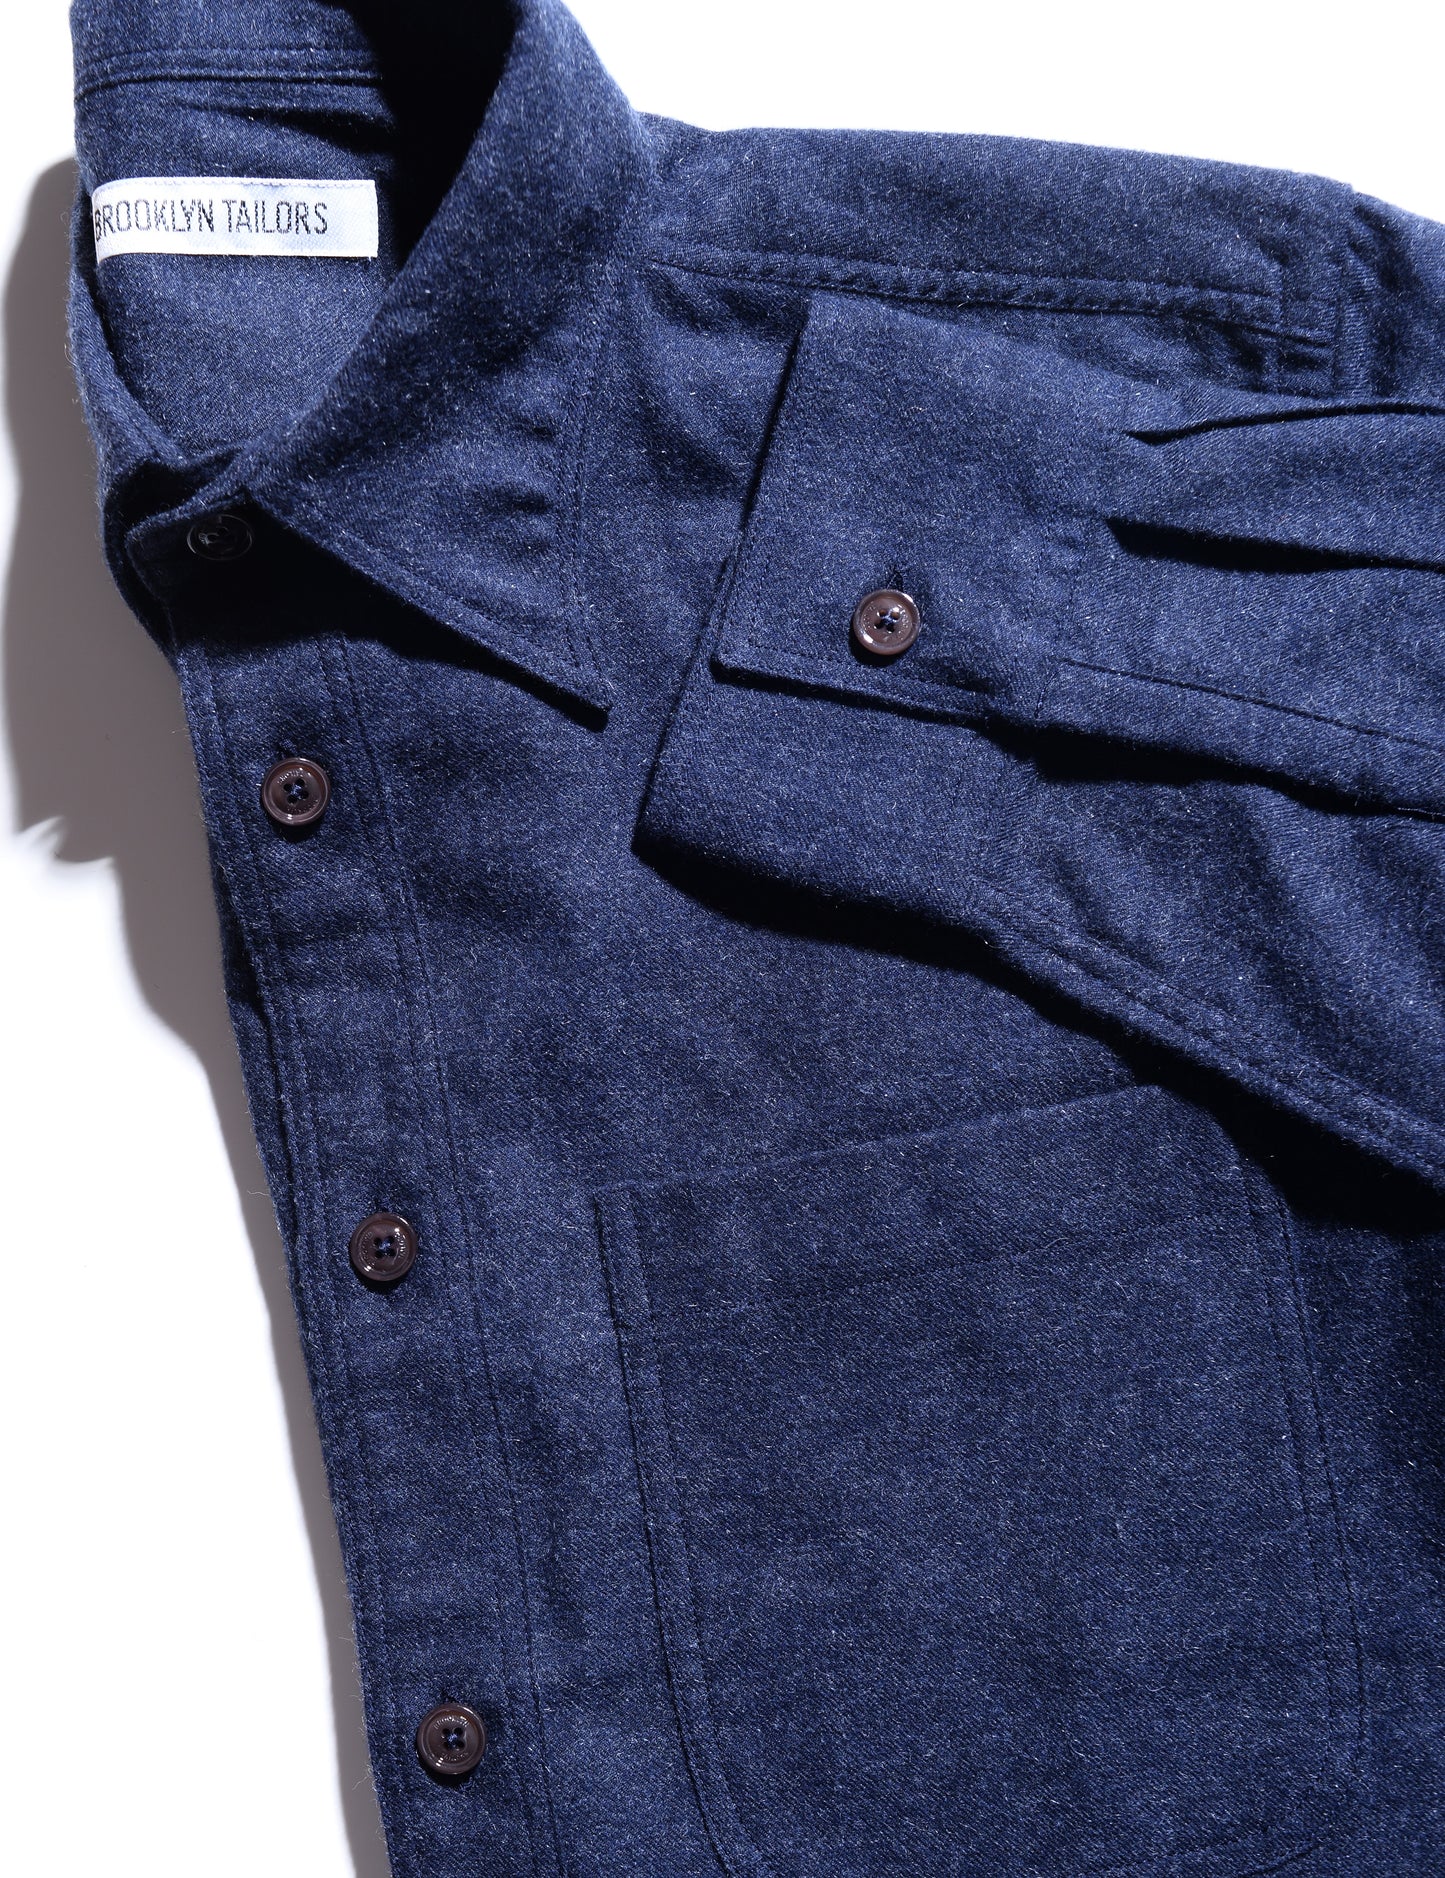 Detail of collar, cuff, and placket of Brooklyn Tailors BKT16 Overshirt in Cotton Cashmere Flannel - Midnight Blue